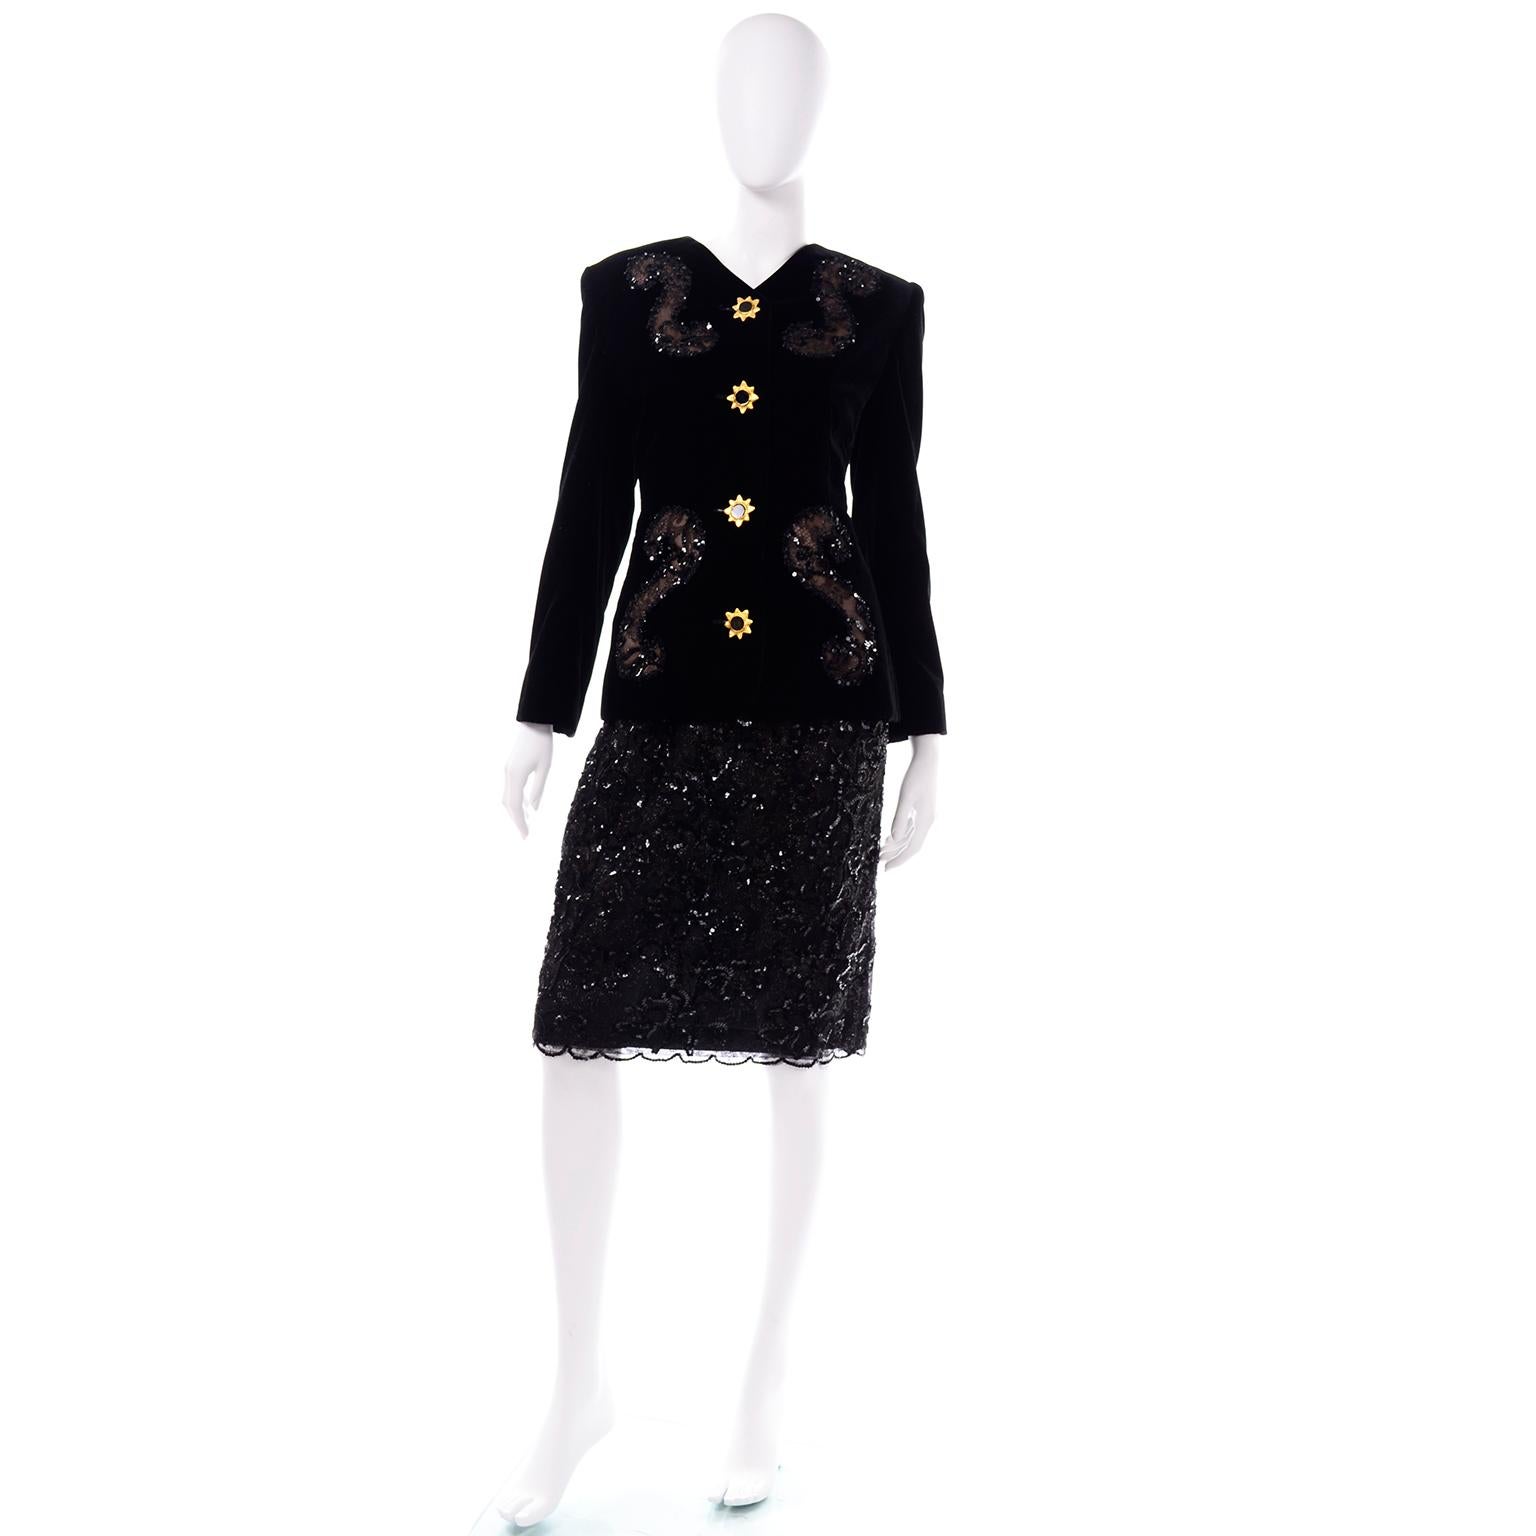 This black velvet Givenchy Couture skirt suit is embellished with black sequins and lace.  We love the bold gold tone starburst and black enamel buttons on the jacket. The black velvet jacket has incredible lace and sequin swirls on the bust and the